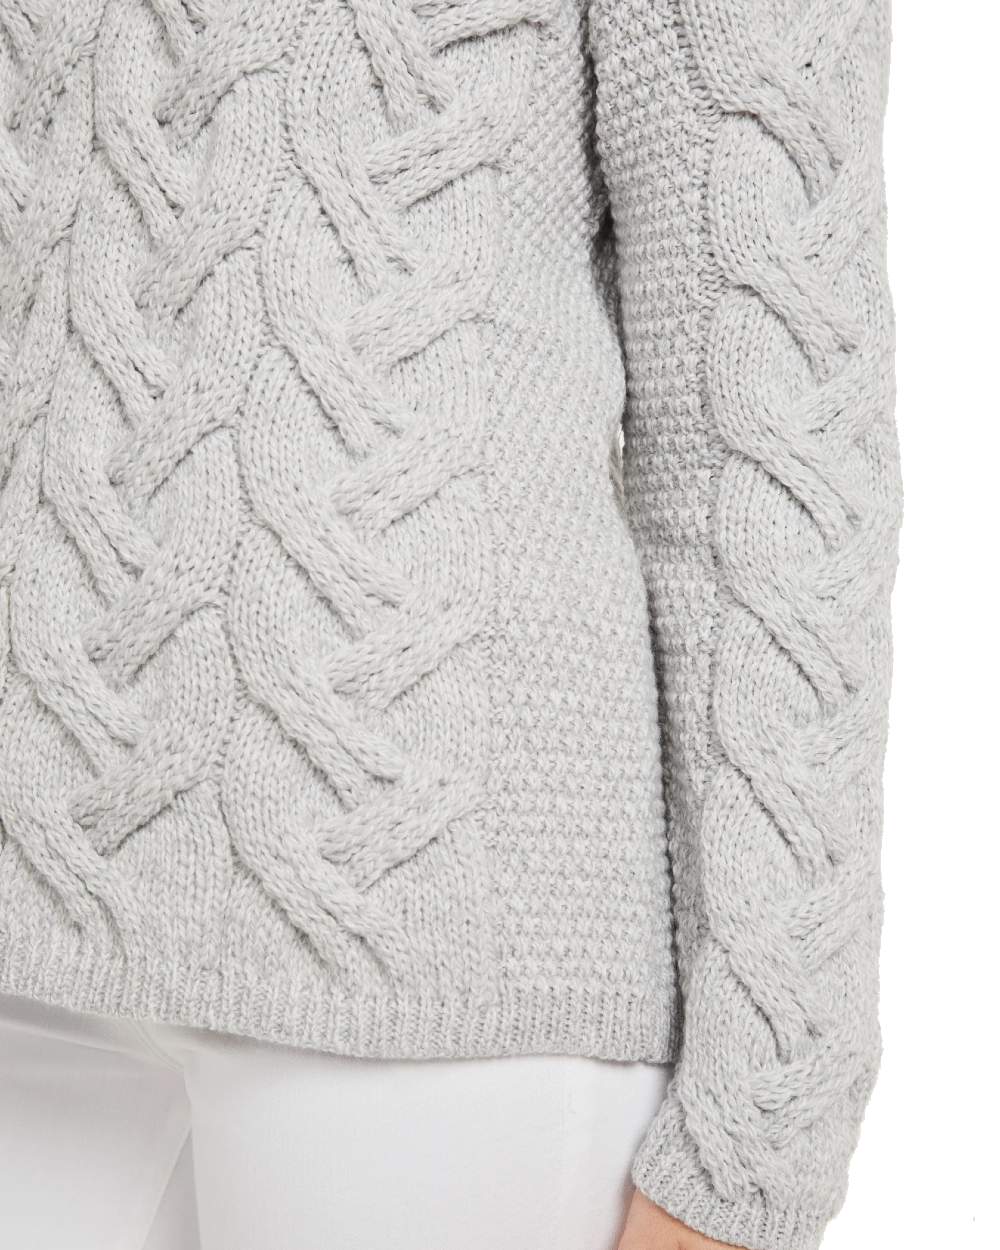 Aran Kinsale Womens Cable Sweater in Feathered Grey 